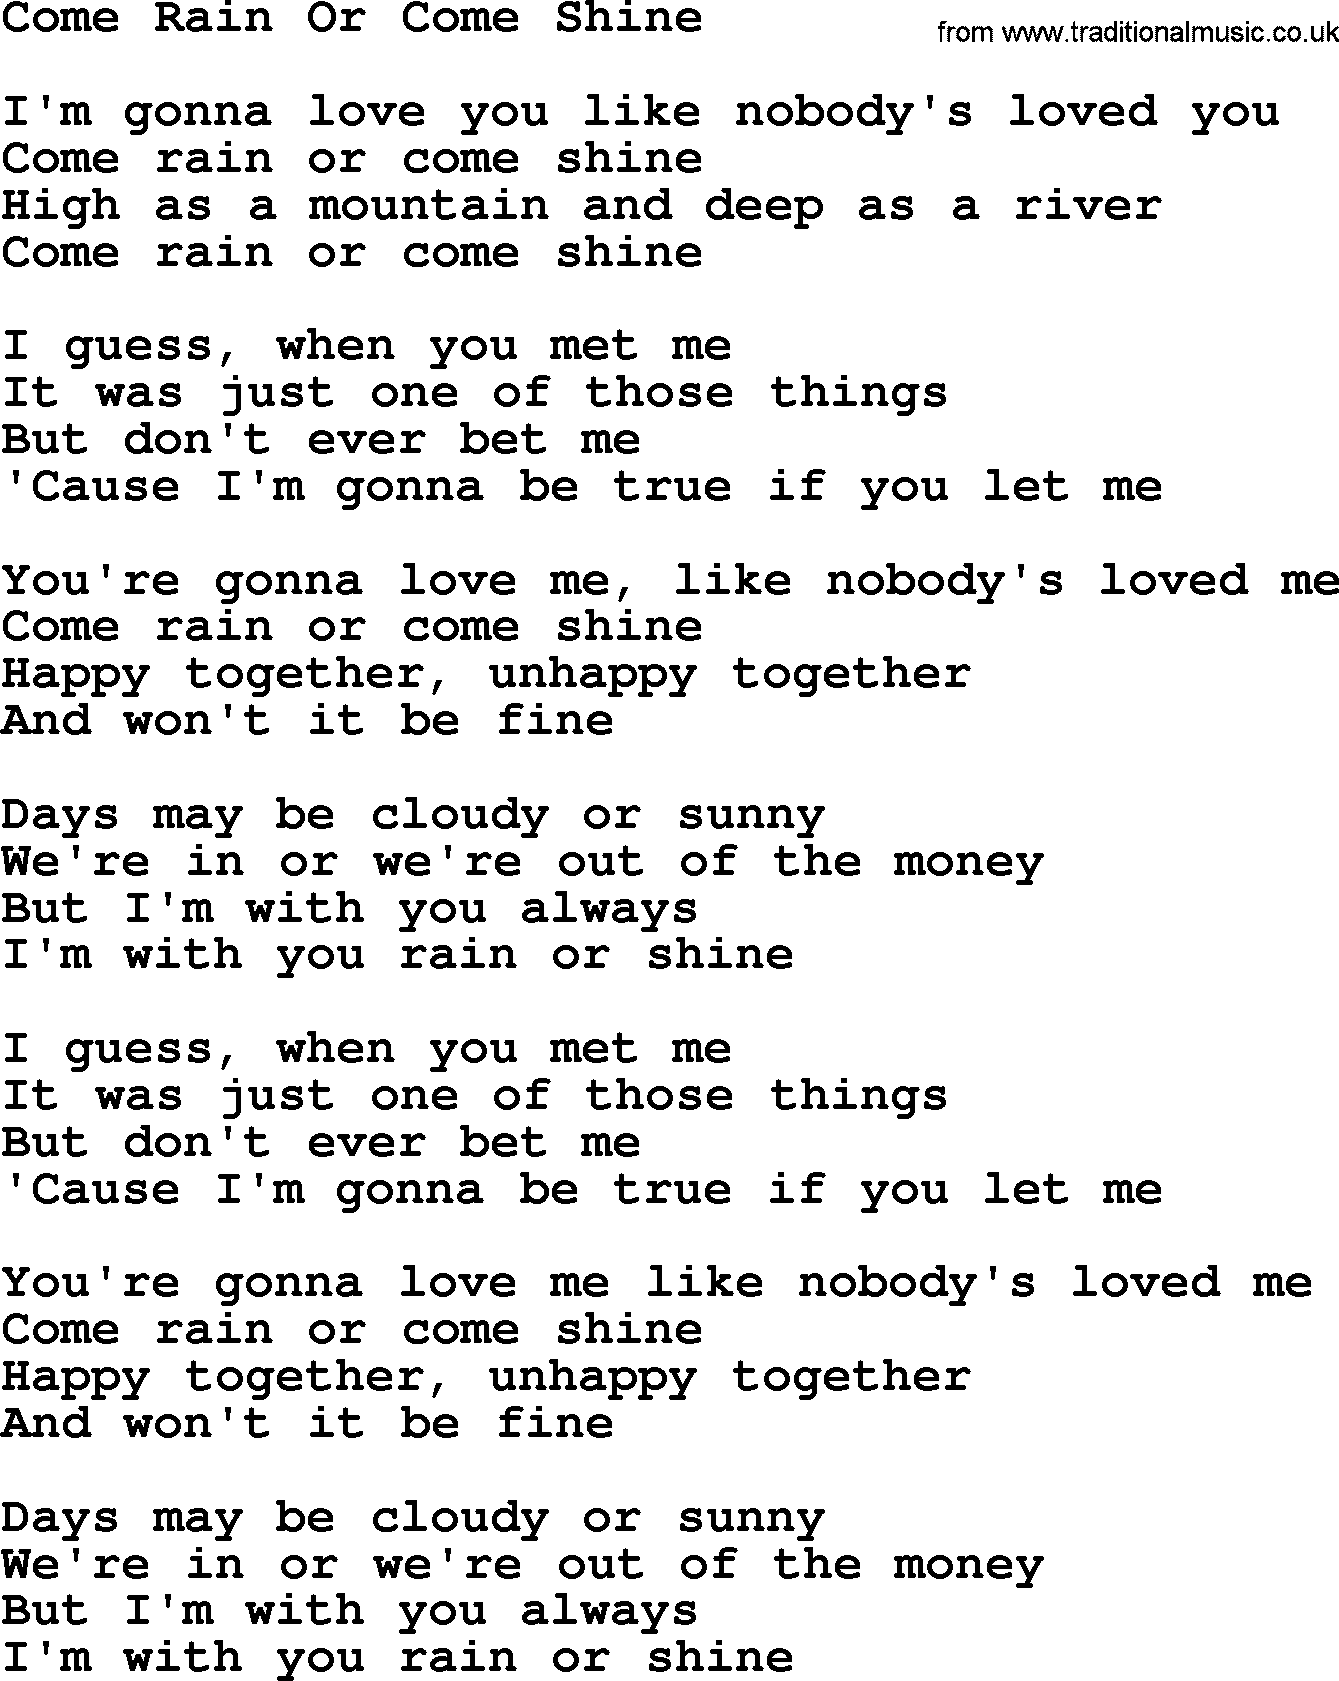 Willie Nelson song: Come Rain Or Come Shine lyrics